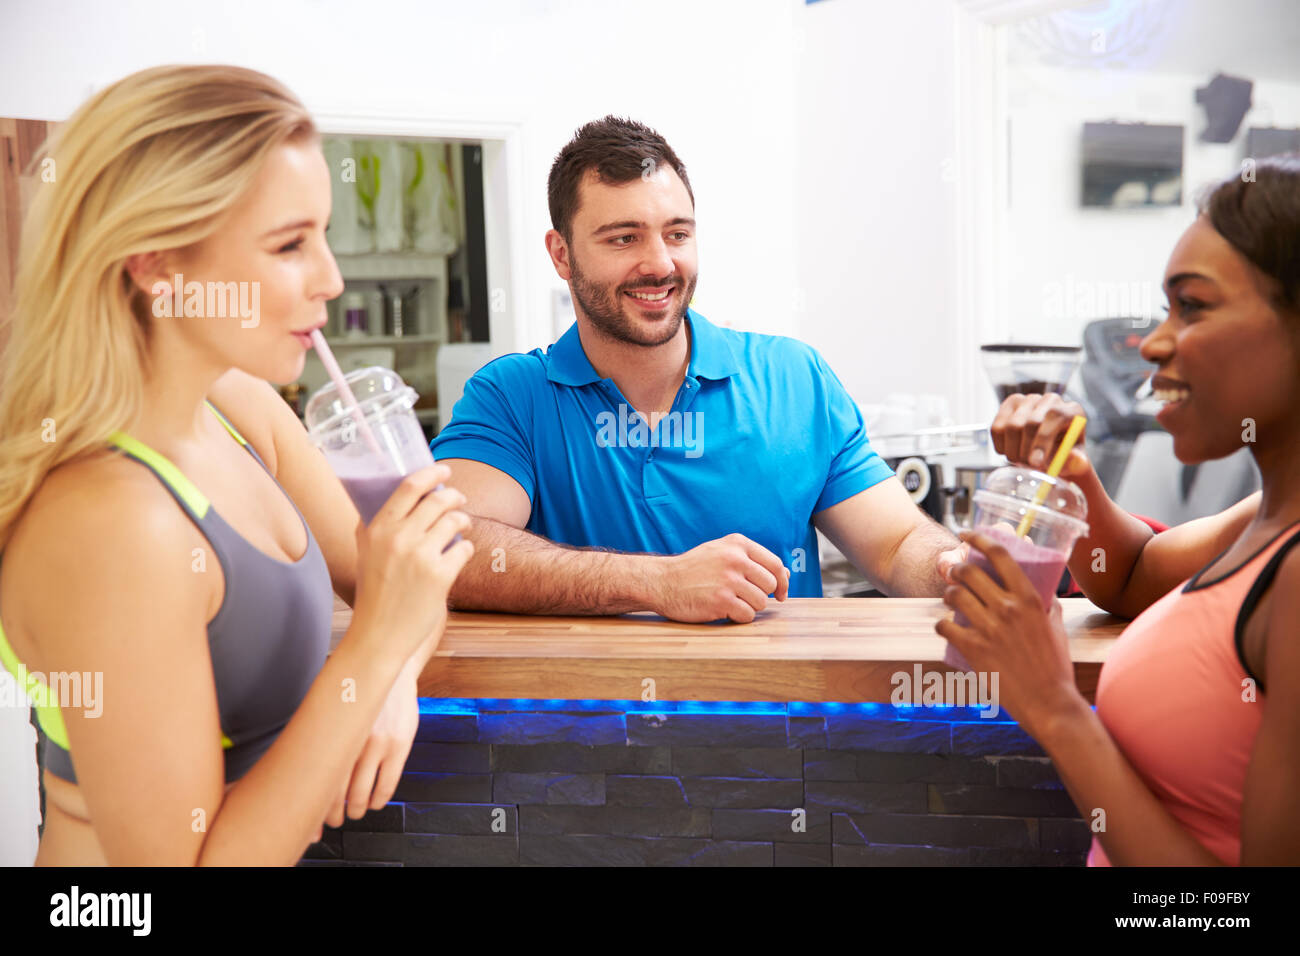 People drinking protein shakes at the fitness bar in a gym Stock Photo